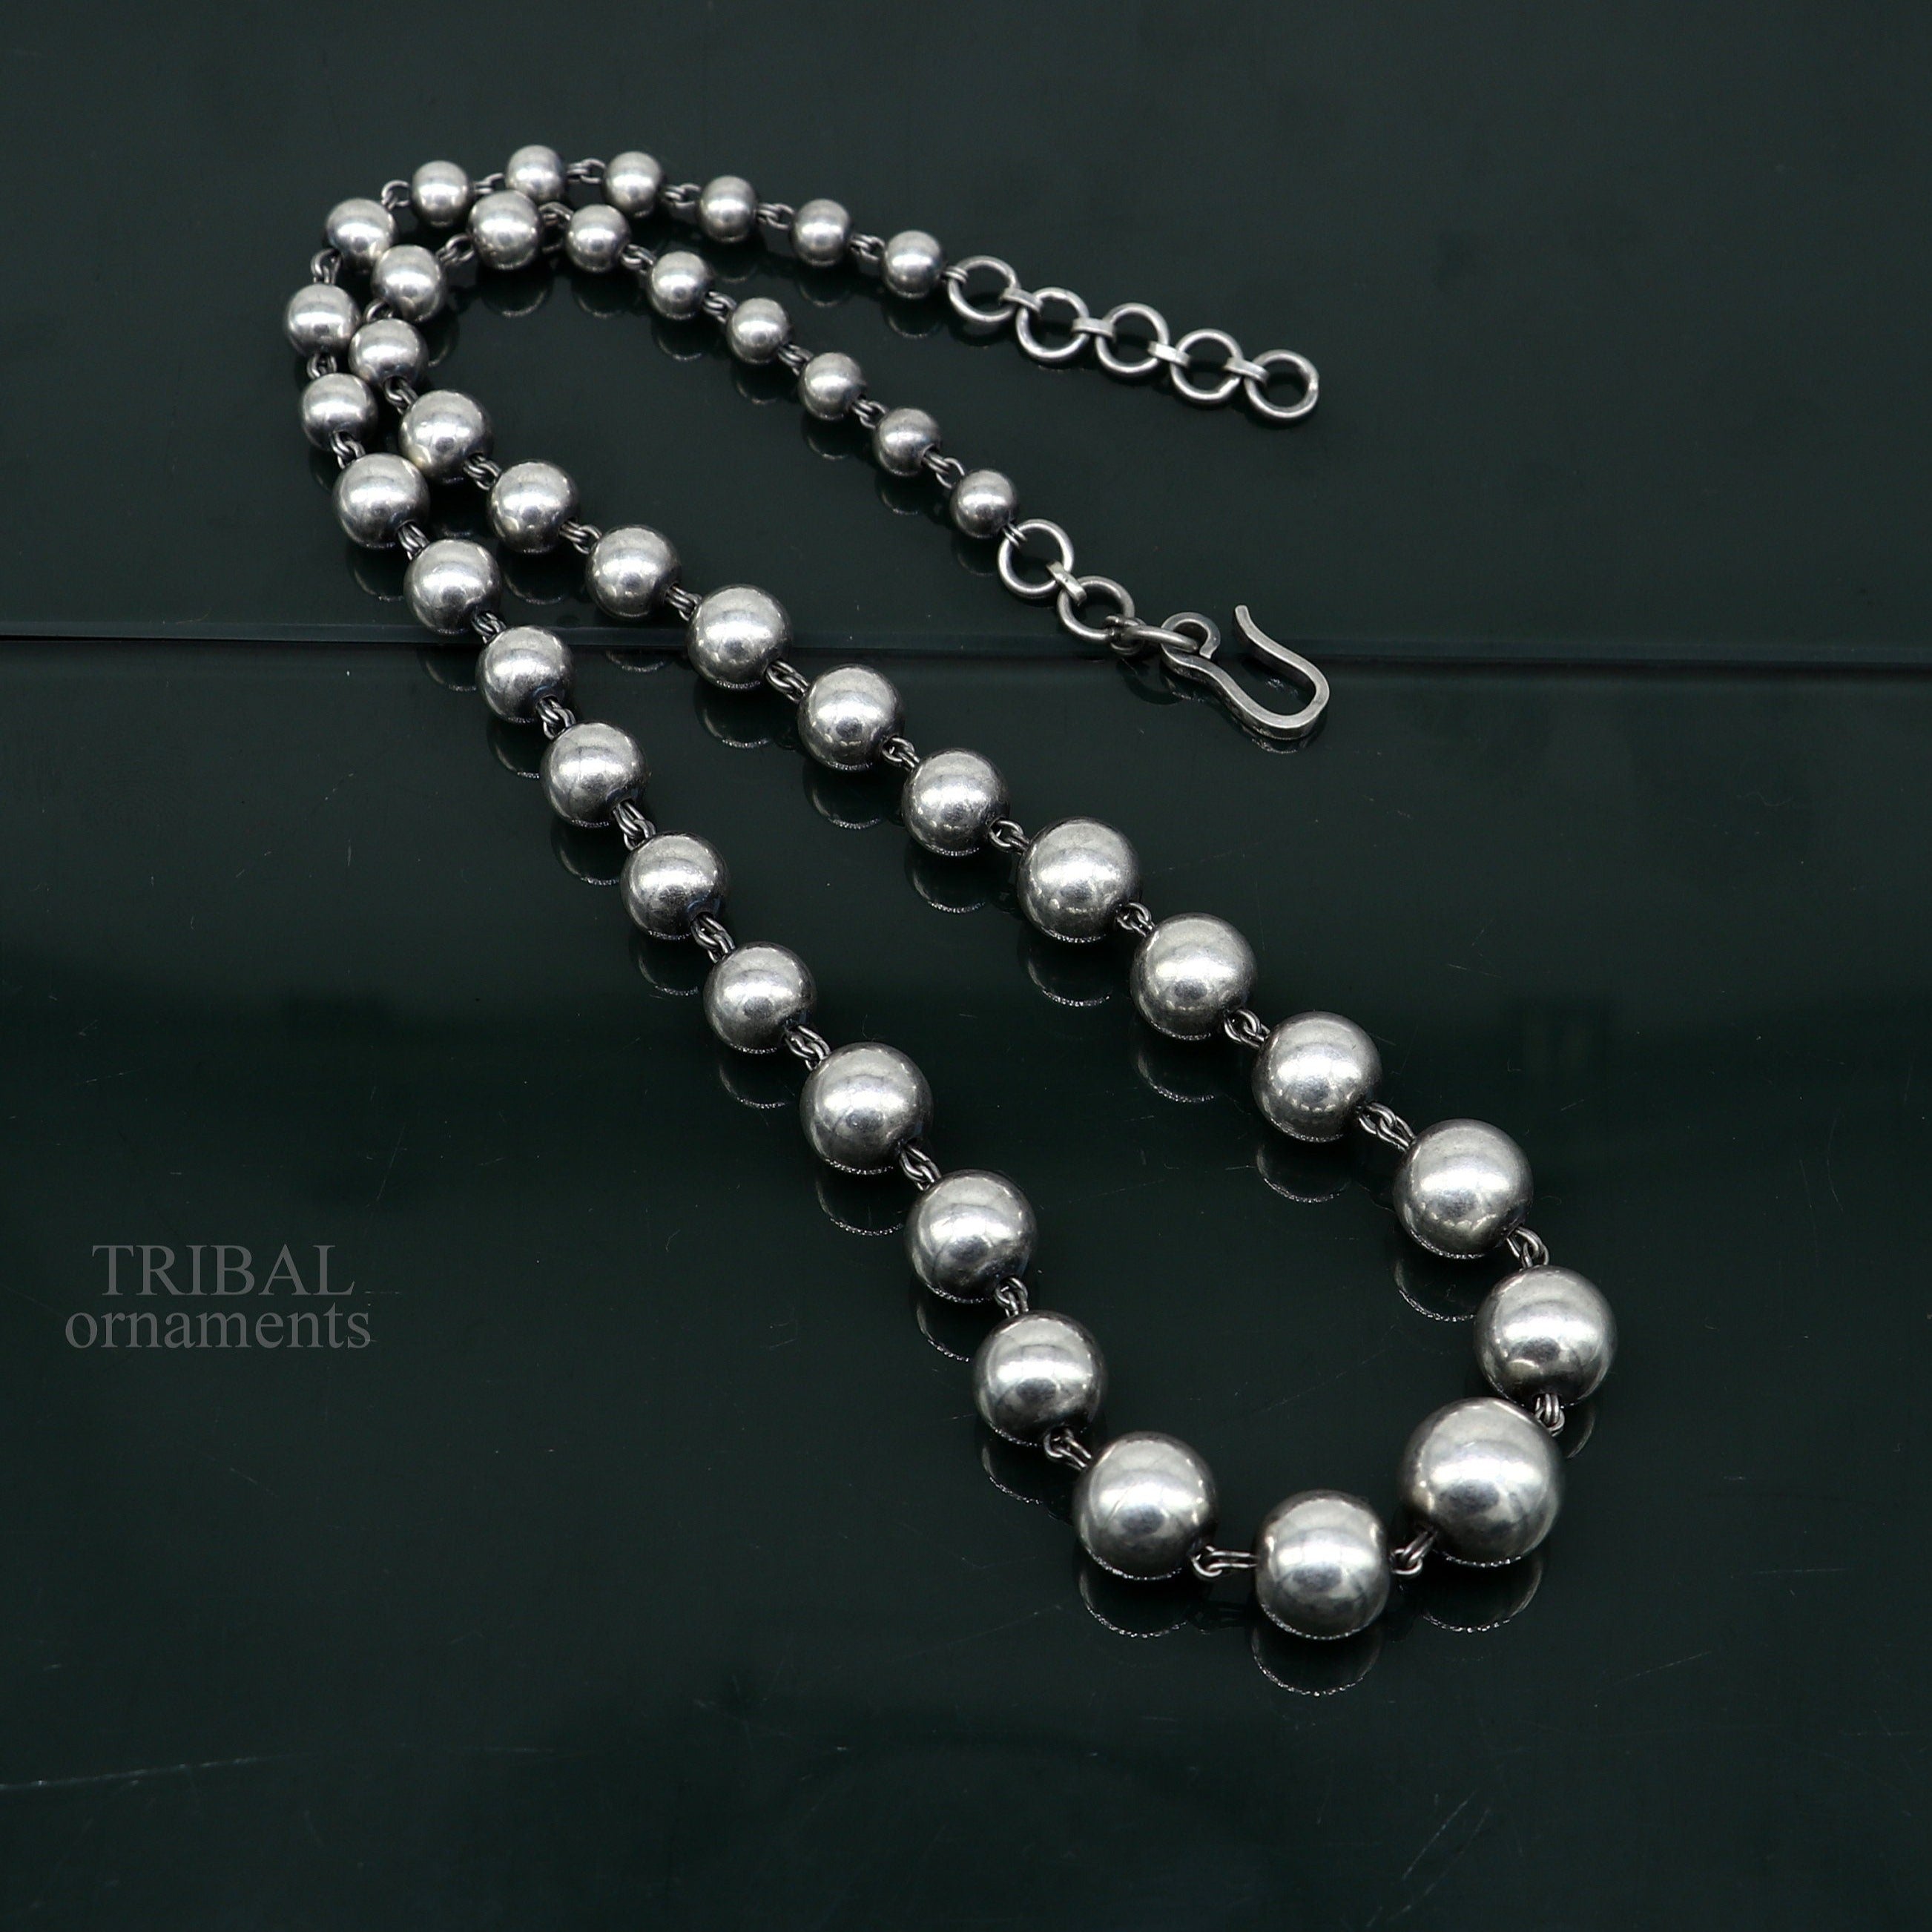 Buy 10mm Sterling Silver Bead Necklace, 10mm Silver Bead Necklace Strand,  10mm Large Round Ball Bead Necklace Online in India - Etsy